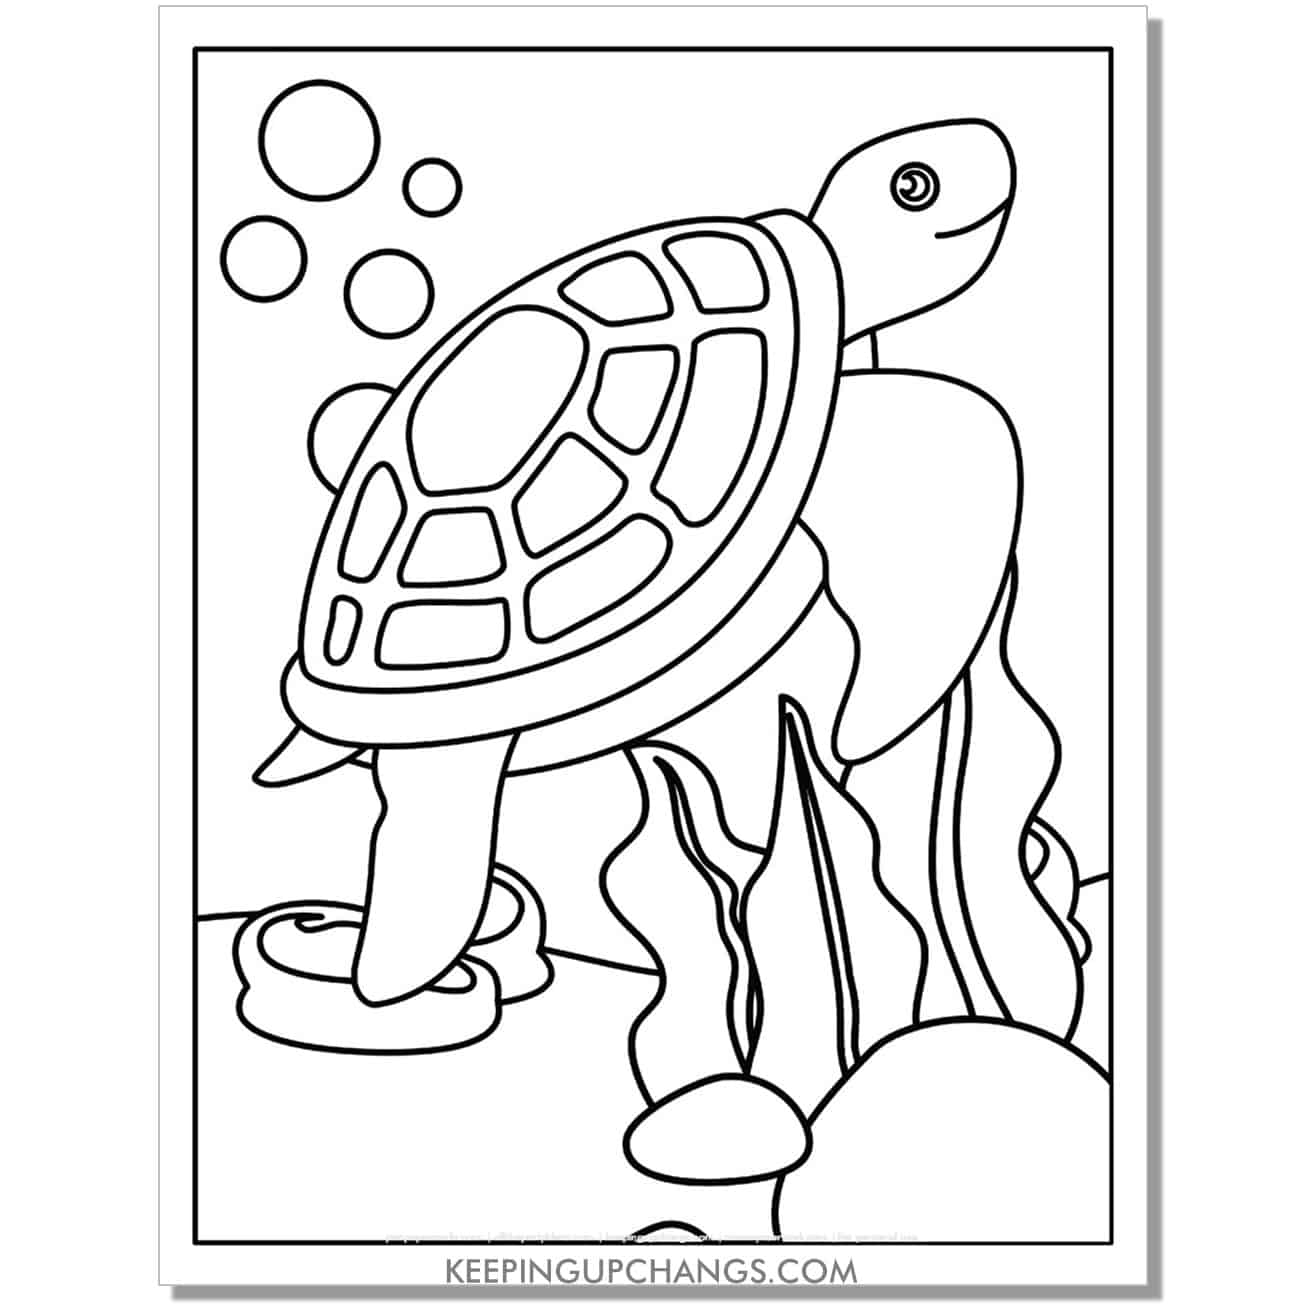 free turtle in the ocean full size coloring page, sheet.